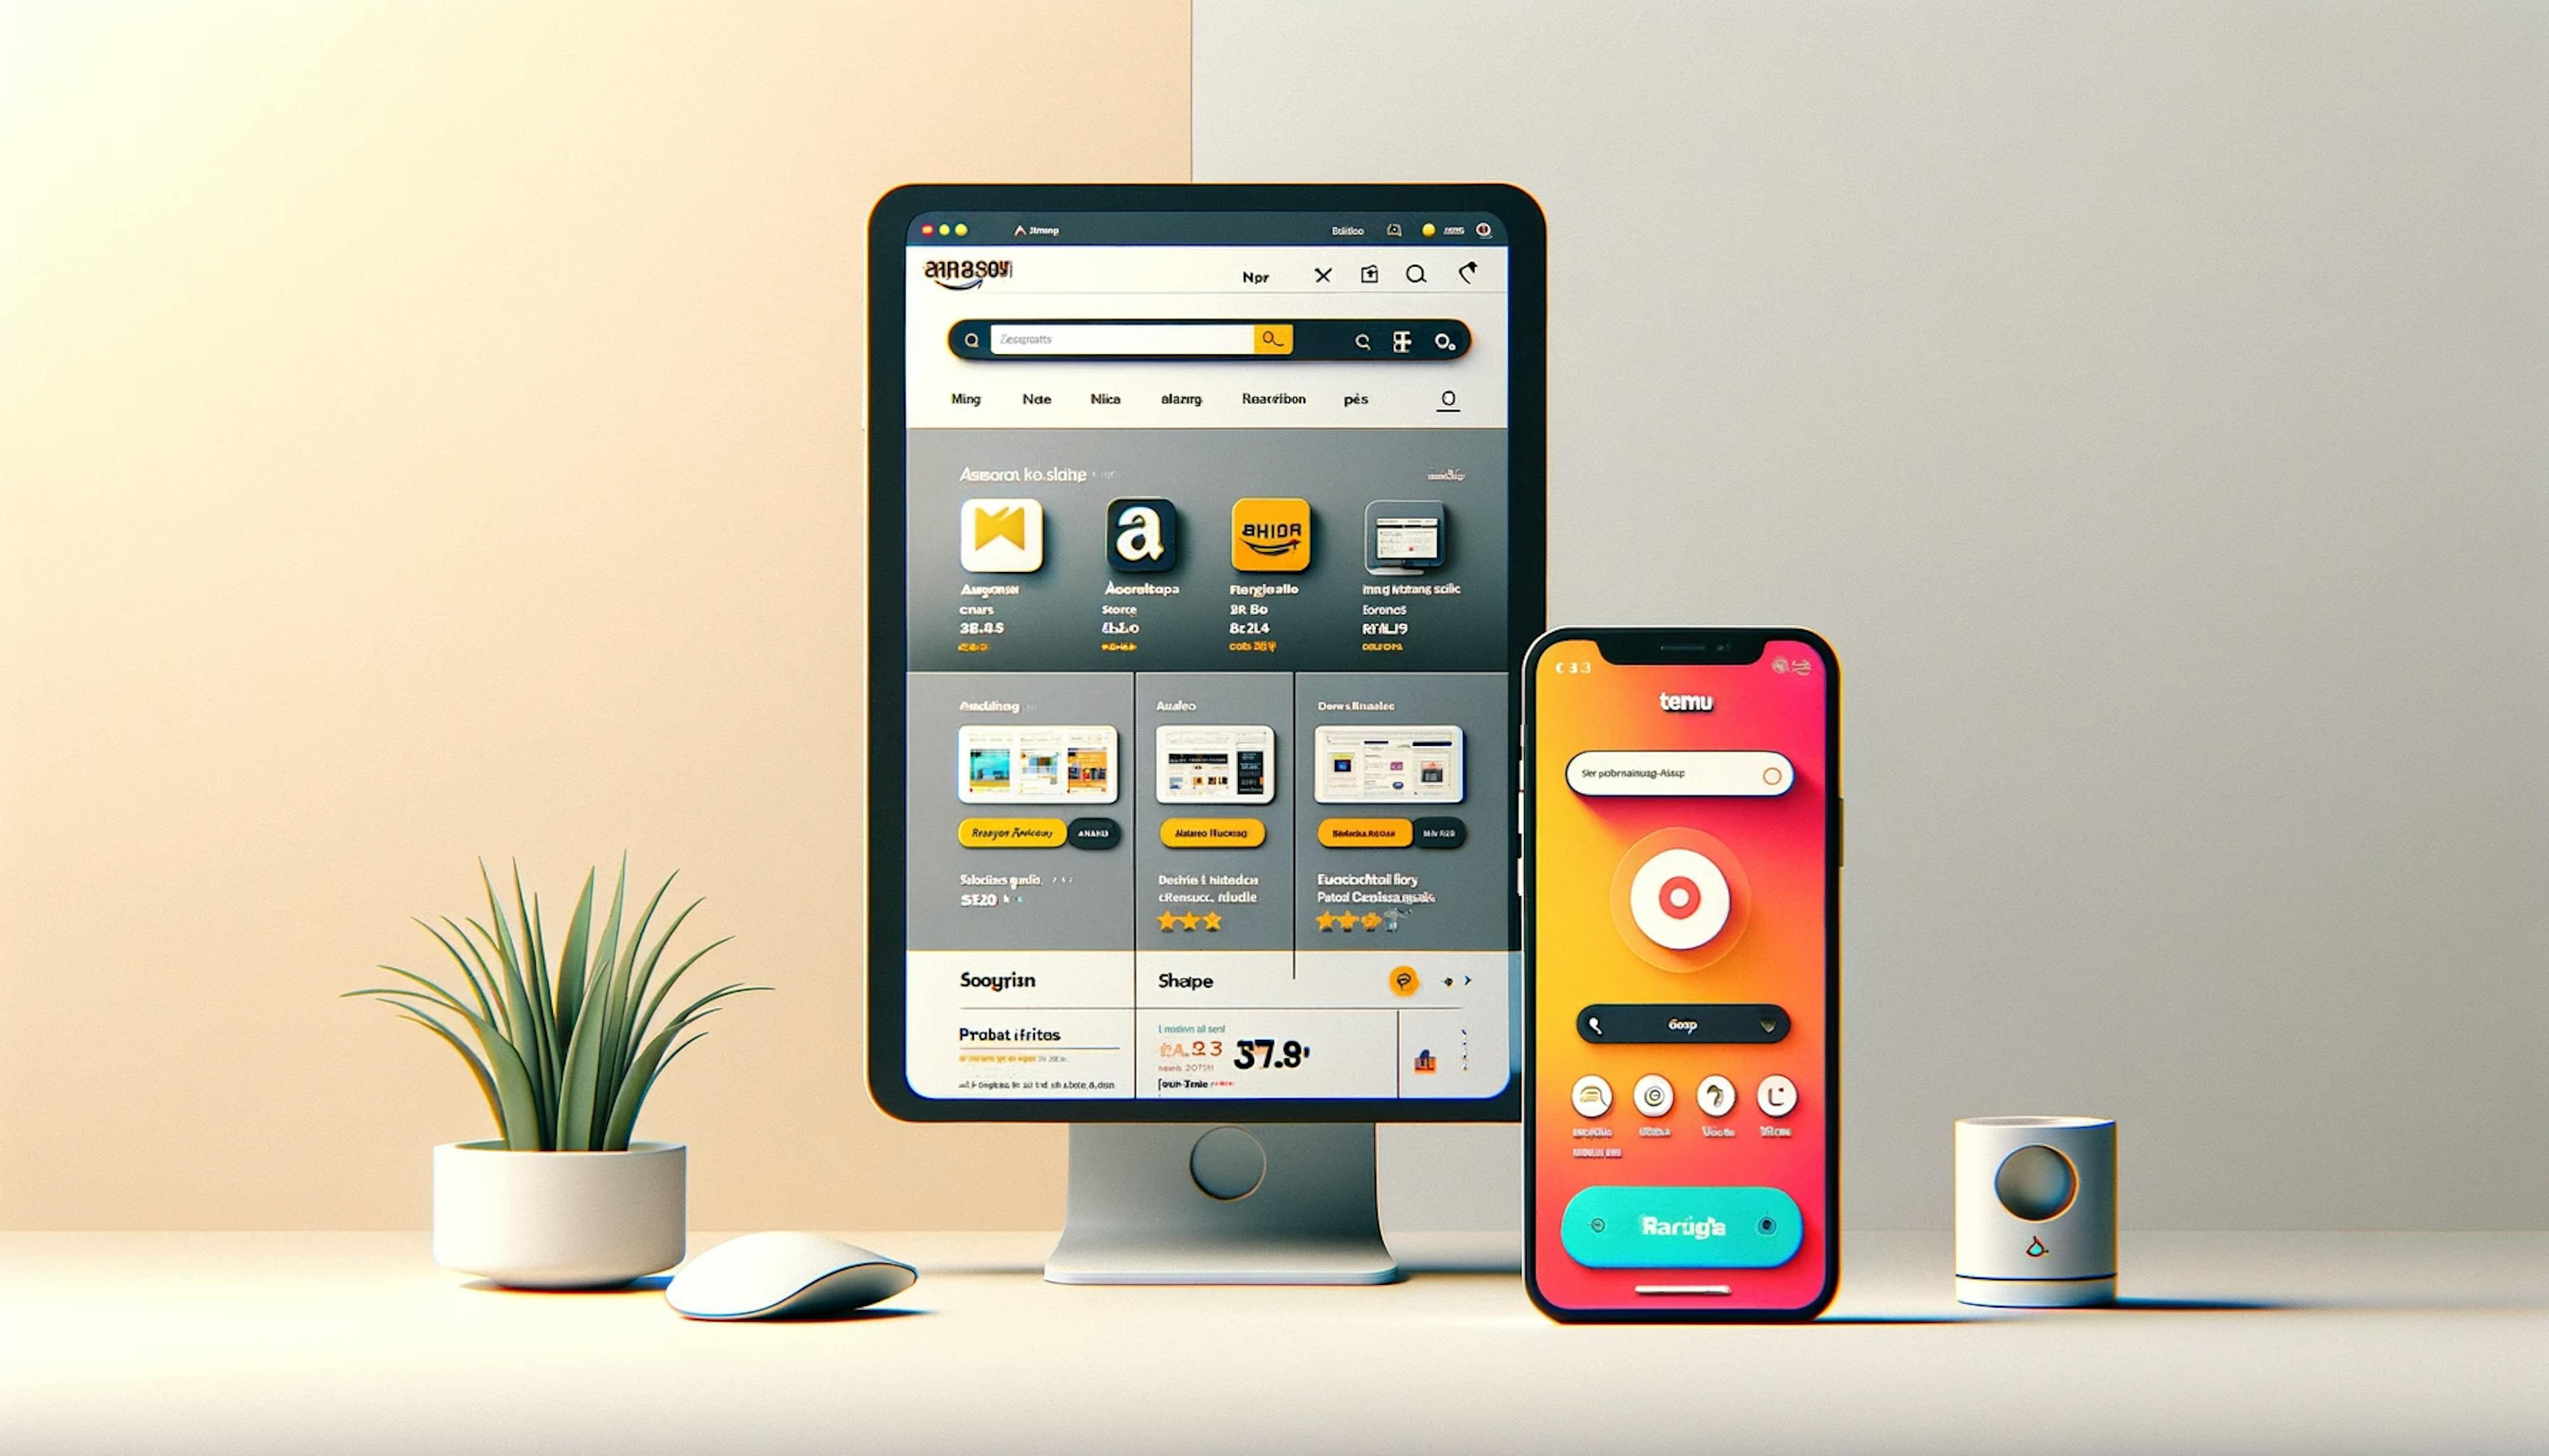 comparison of UI for both companies, Amazon and Temu